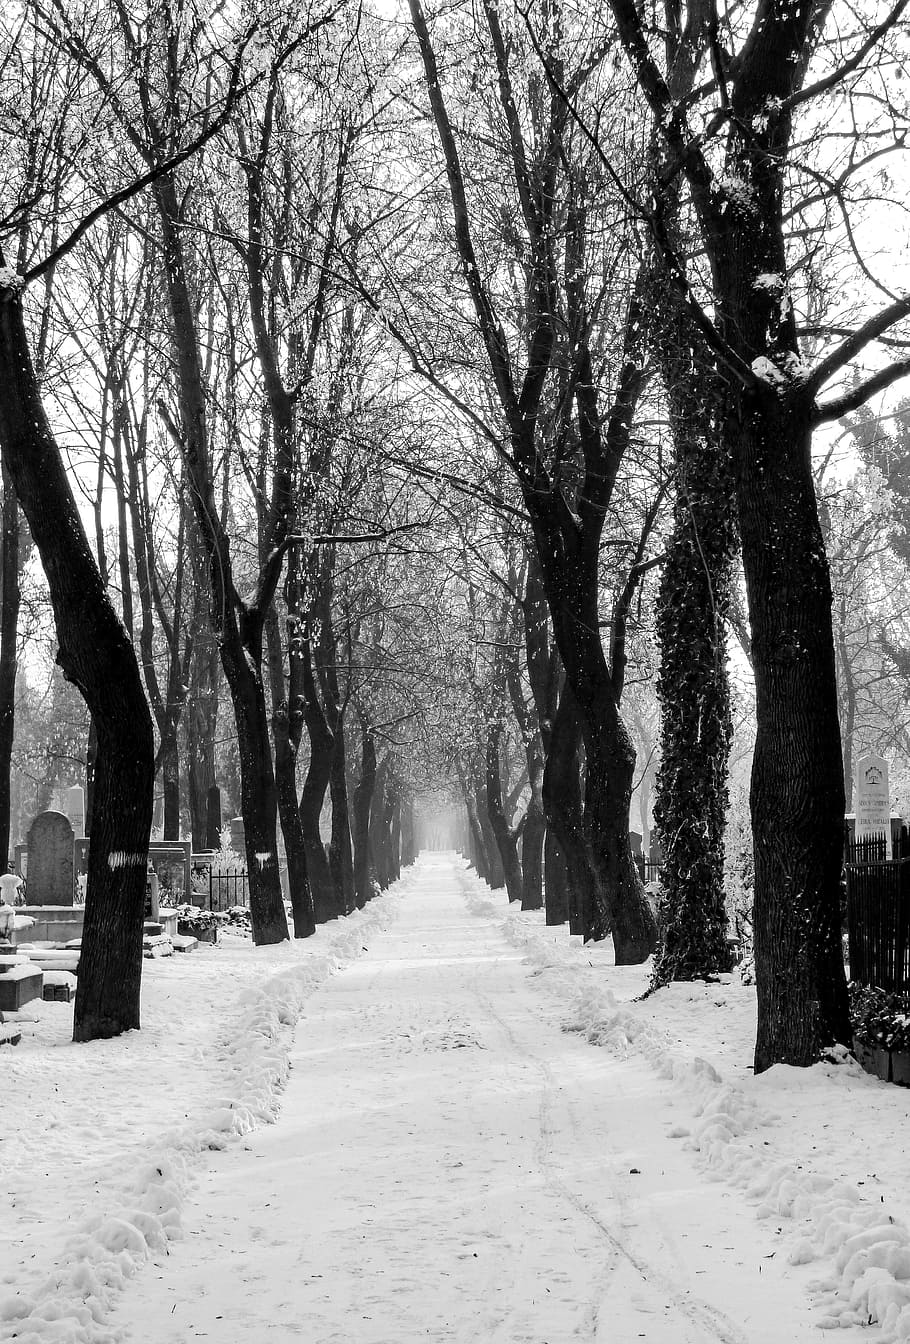 Promo, Winter, Road, Nature, Snowy Road, winter, road, snow, trees, mystic, cold